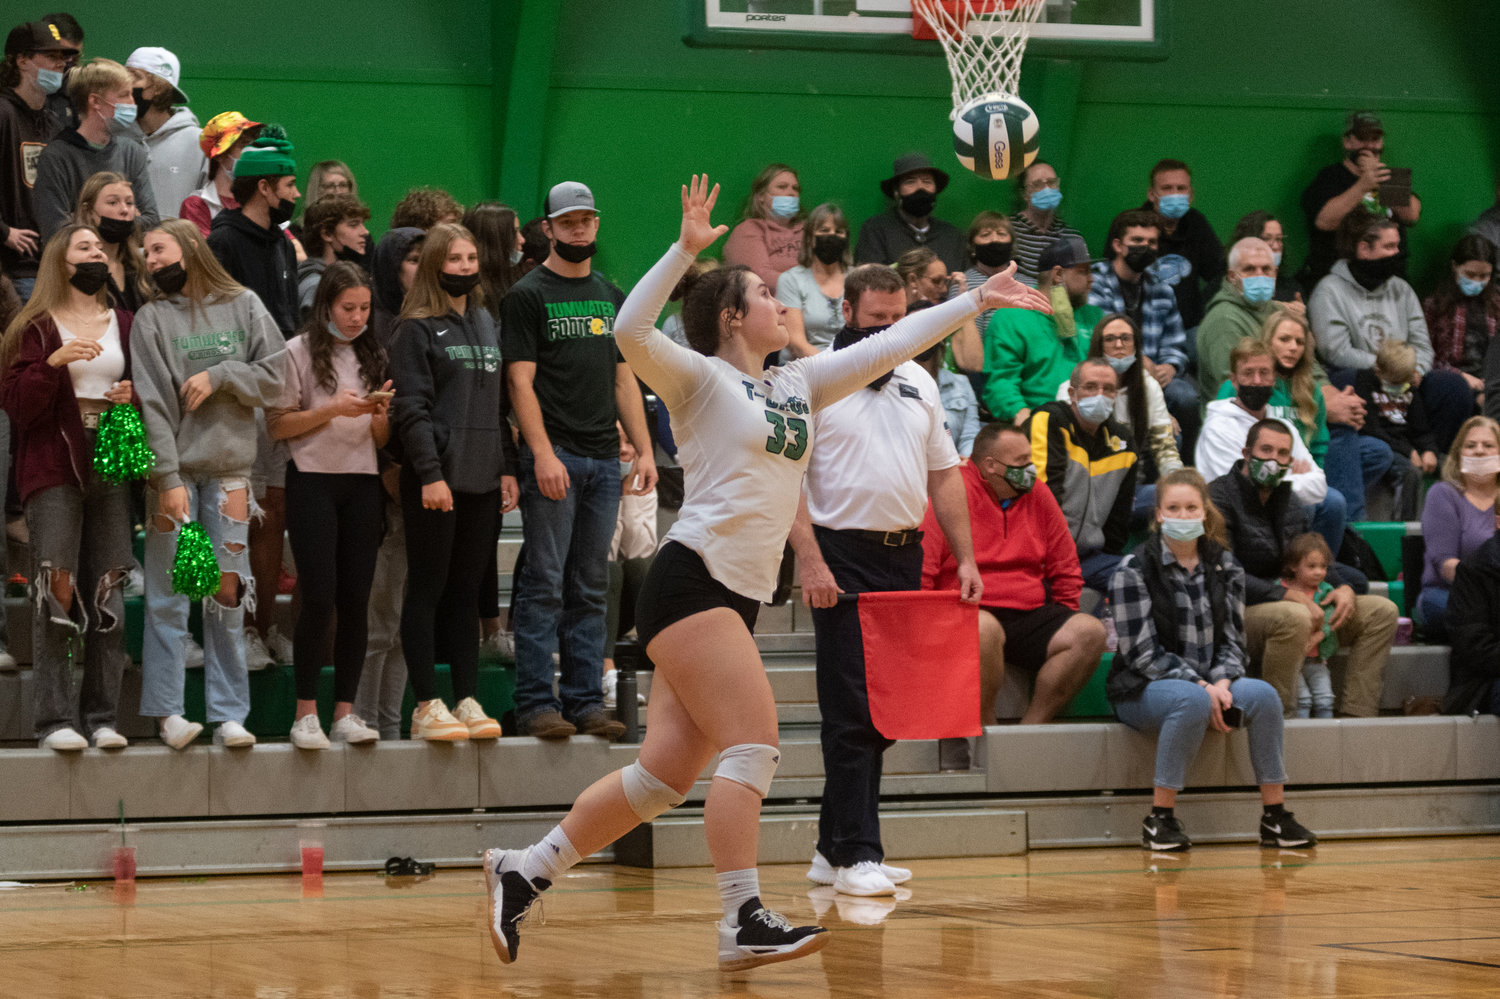 Tumwater's libero goes up to serve in front of a home crowd against Black Hills in the district playoffs Nov. 13.